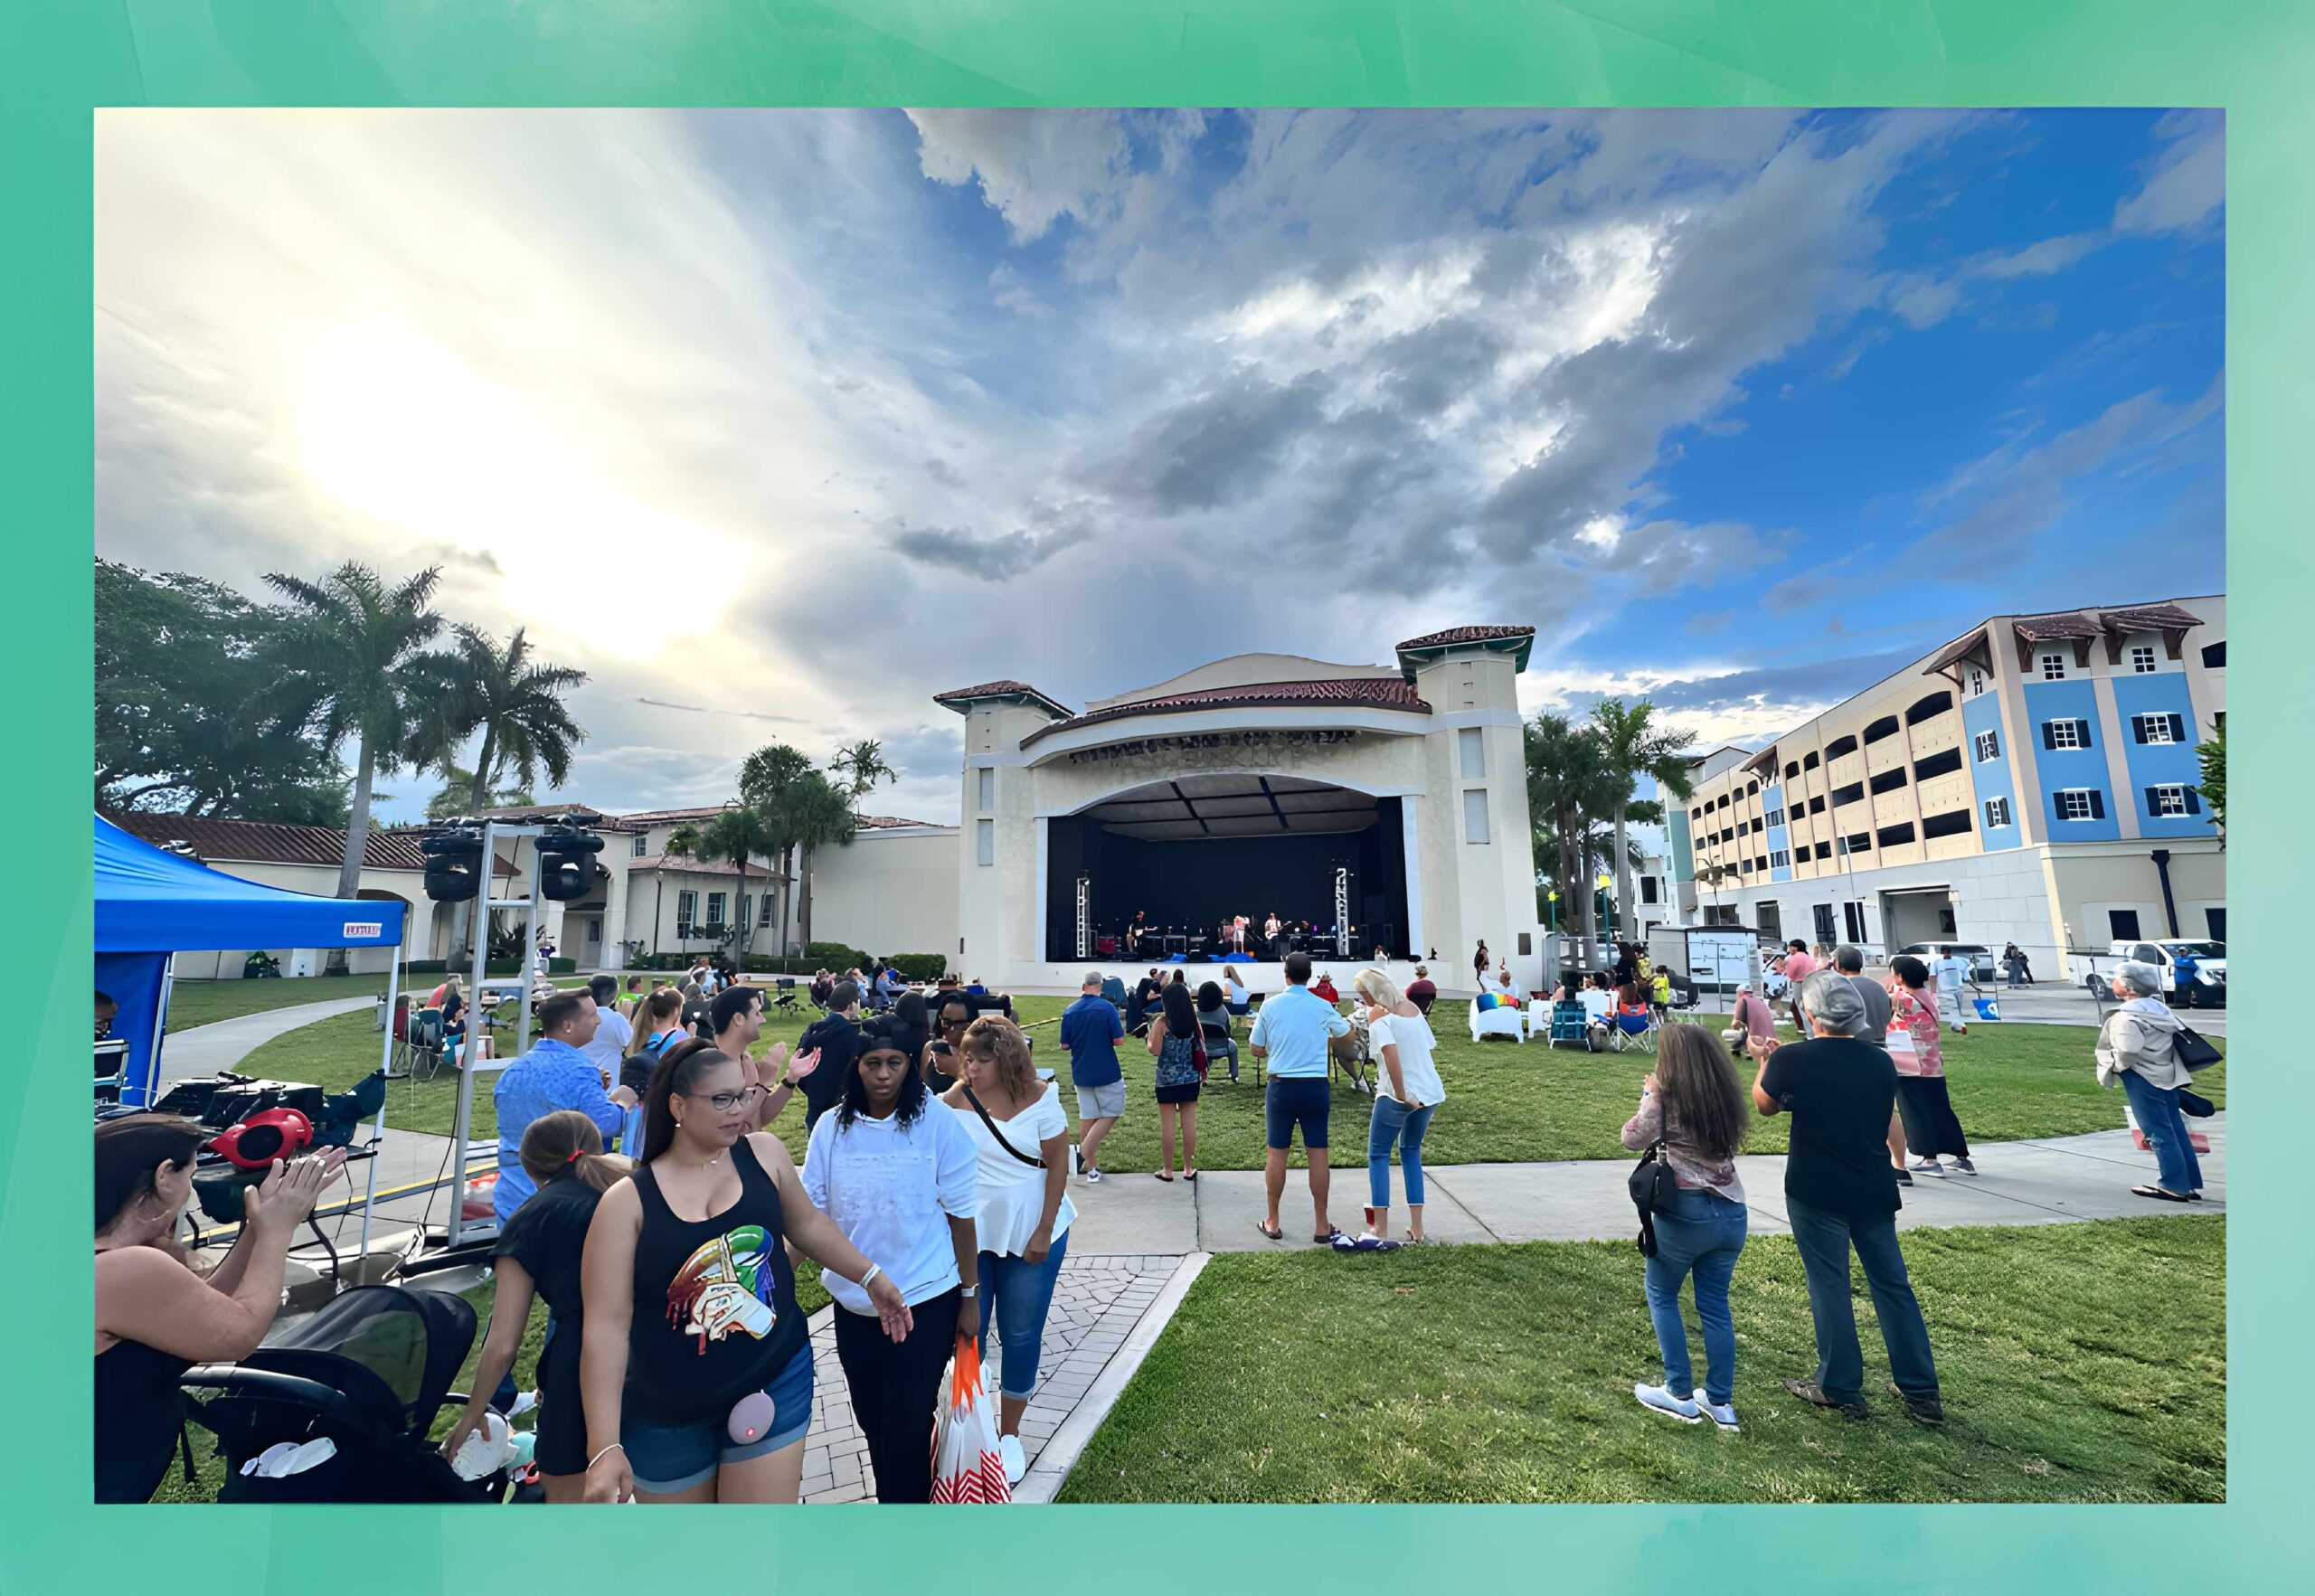 Free concerts in Delray